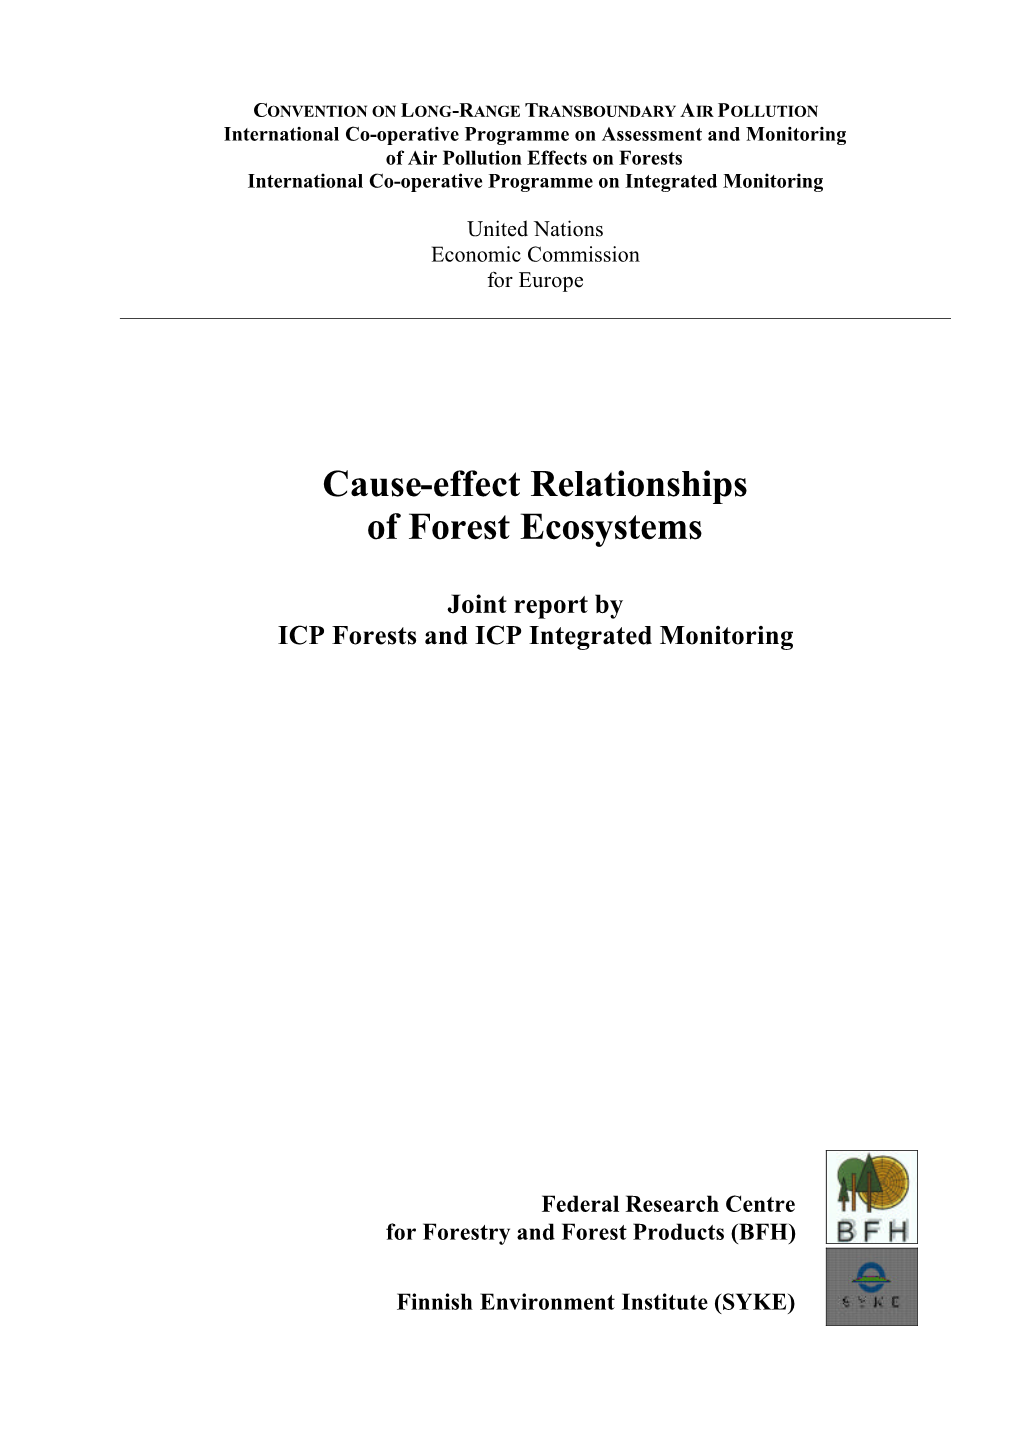 Cause-Effect Relationships of Forest Ecosystems